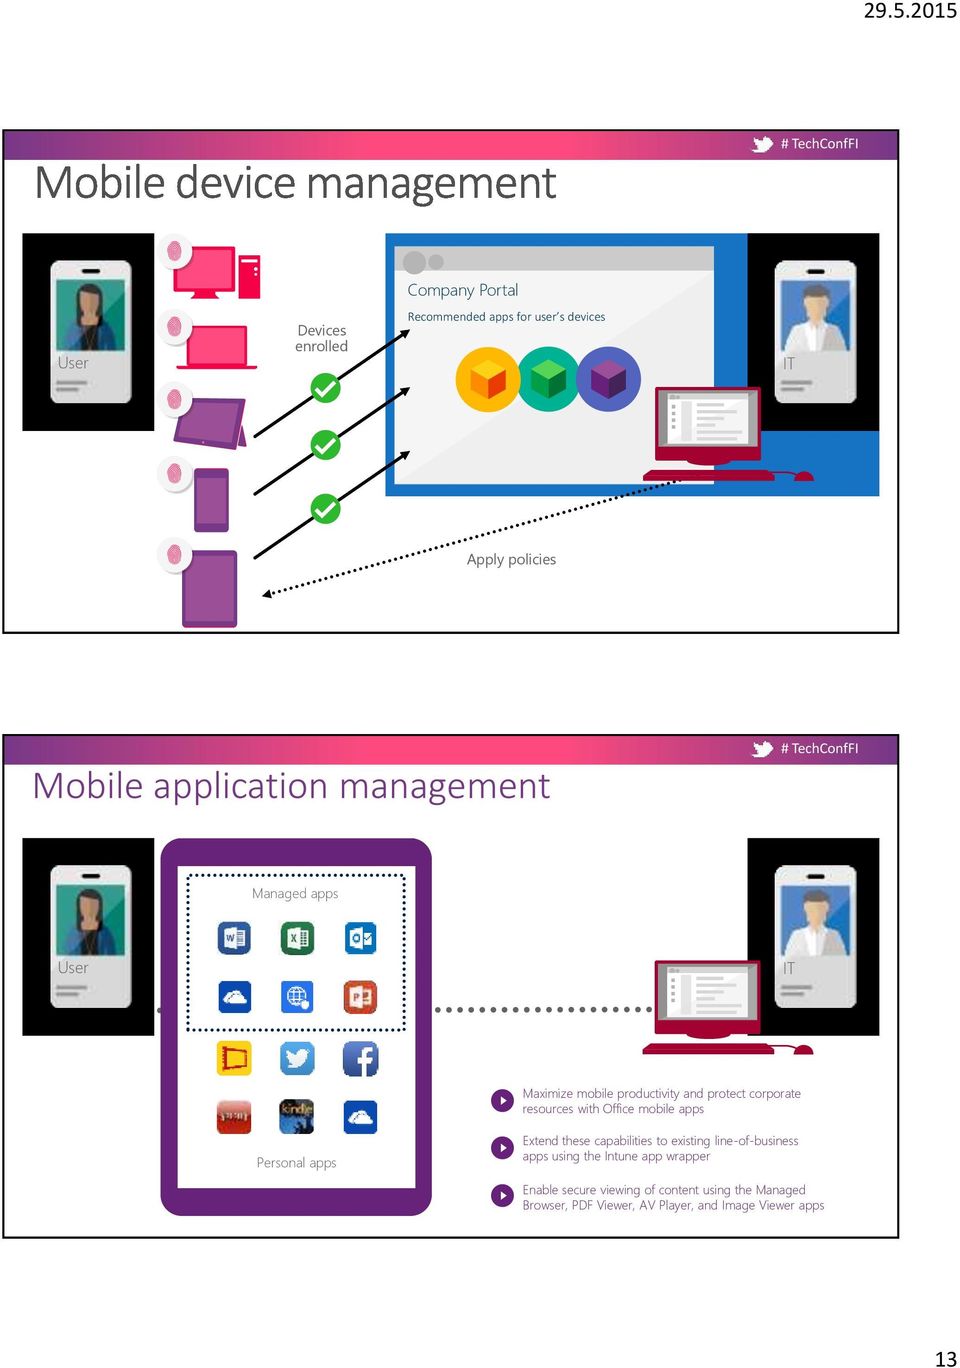 apps Personal apps Personal apps Extend these capabilities to existing line-of-business apps using the Intune